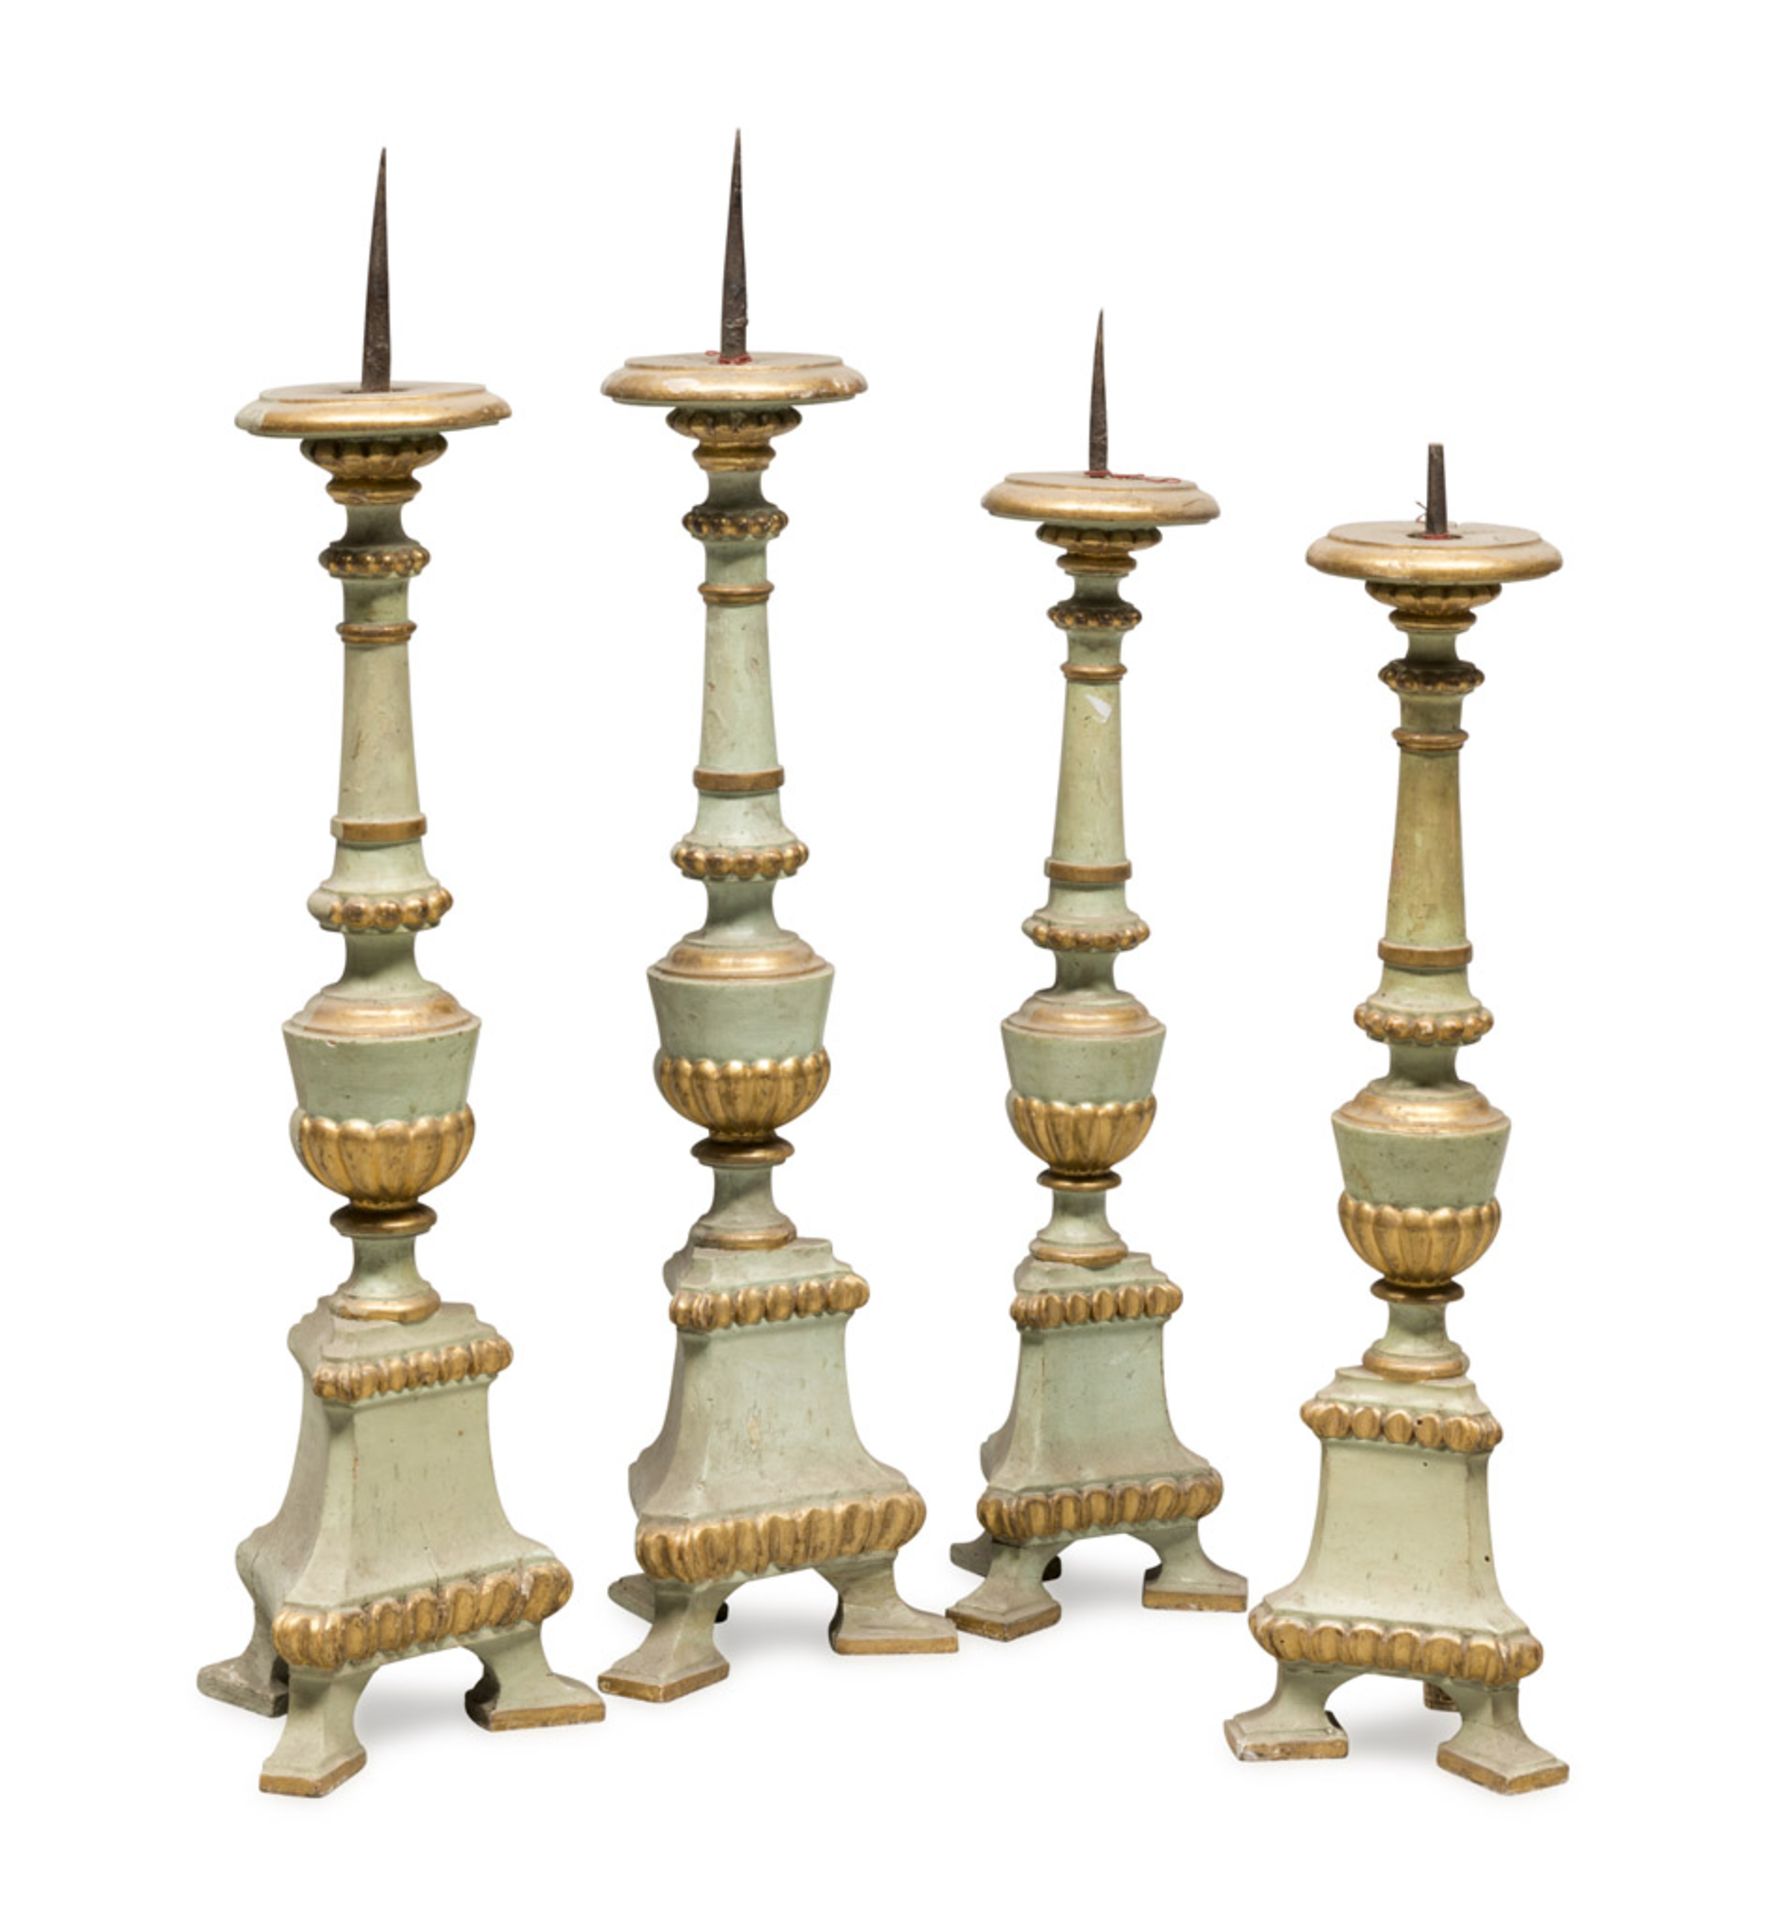 TWO PAIRS OF CANDLESTICKS IN GREEN LAQUERED WOOD, MARCHE 18TH CENTURY with gilded and fluted